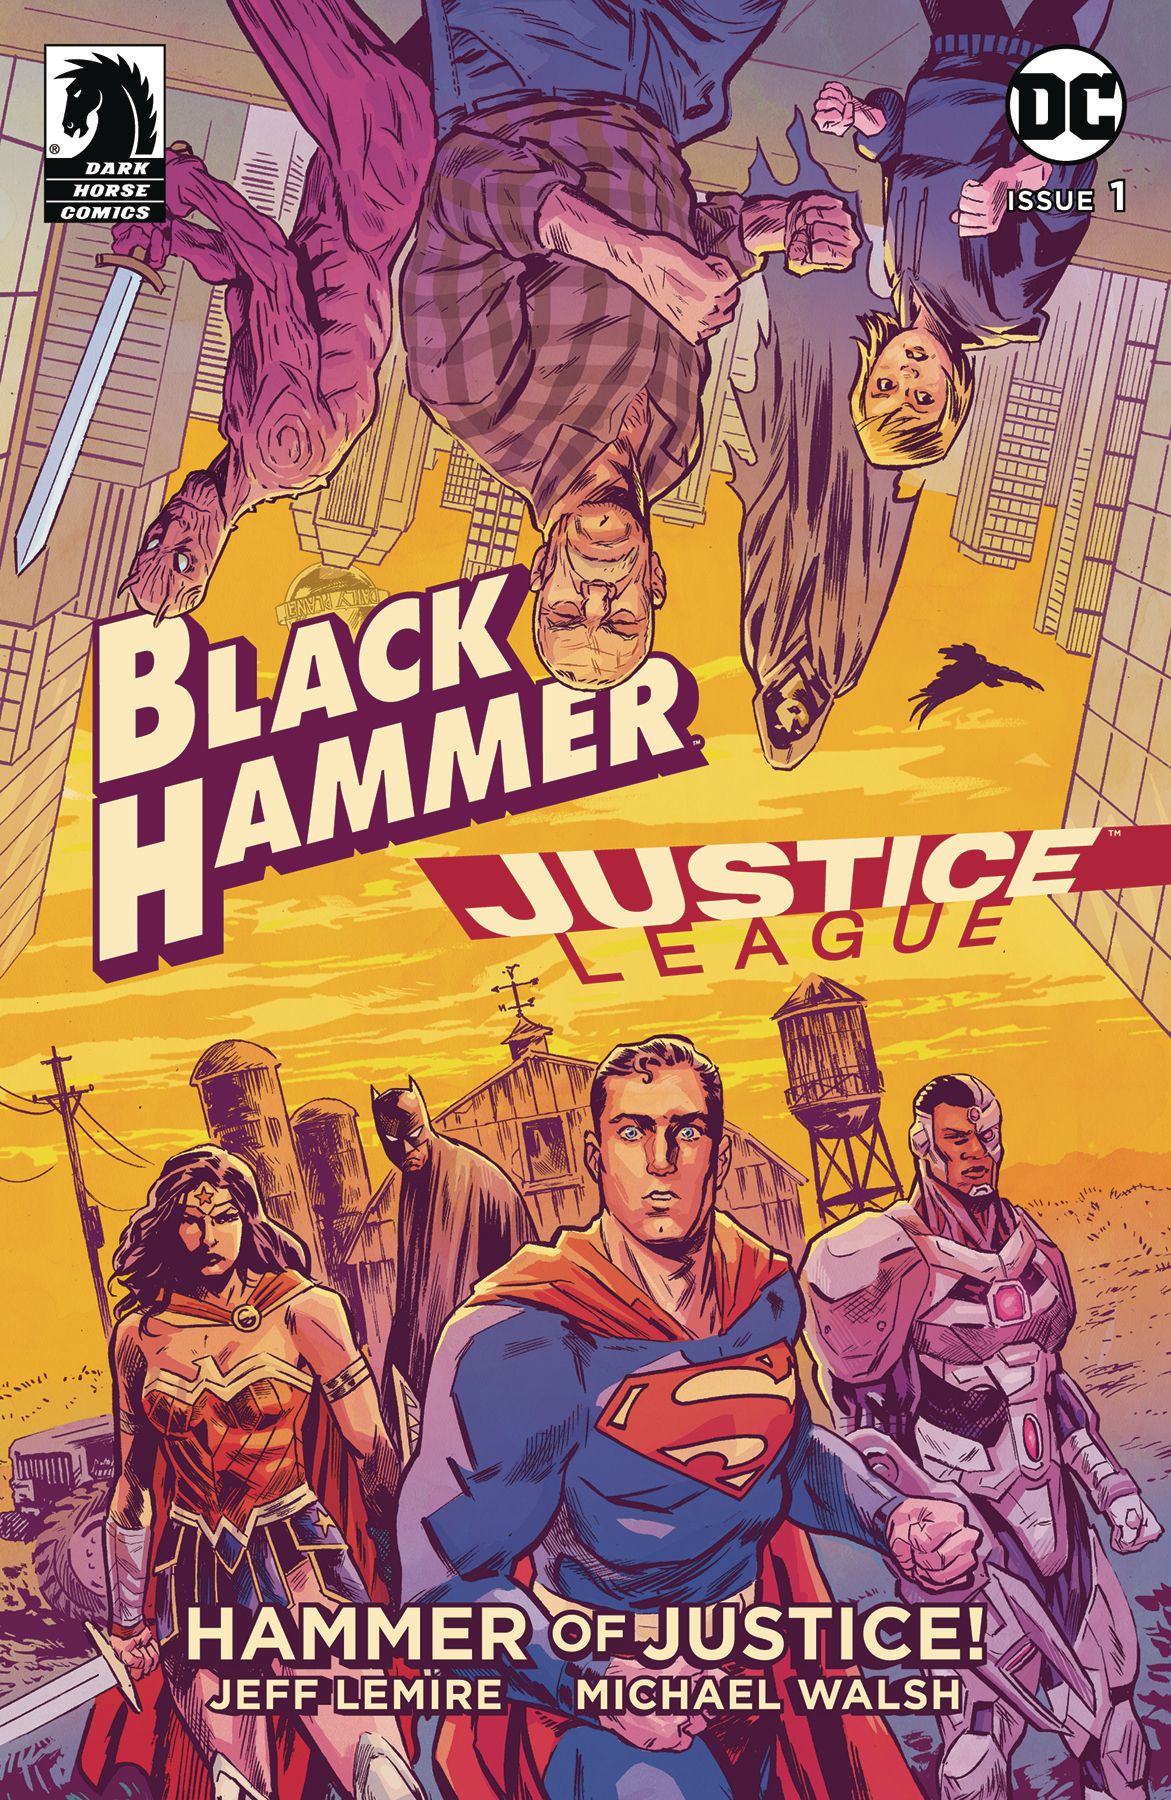 Black Hammer/Justice League: Hammer of Justice #1 Comic